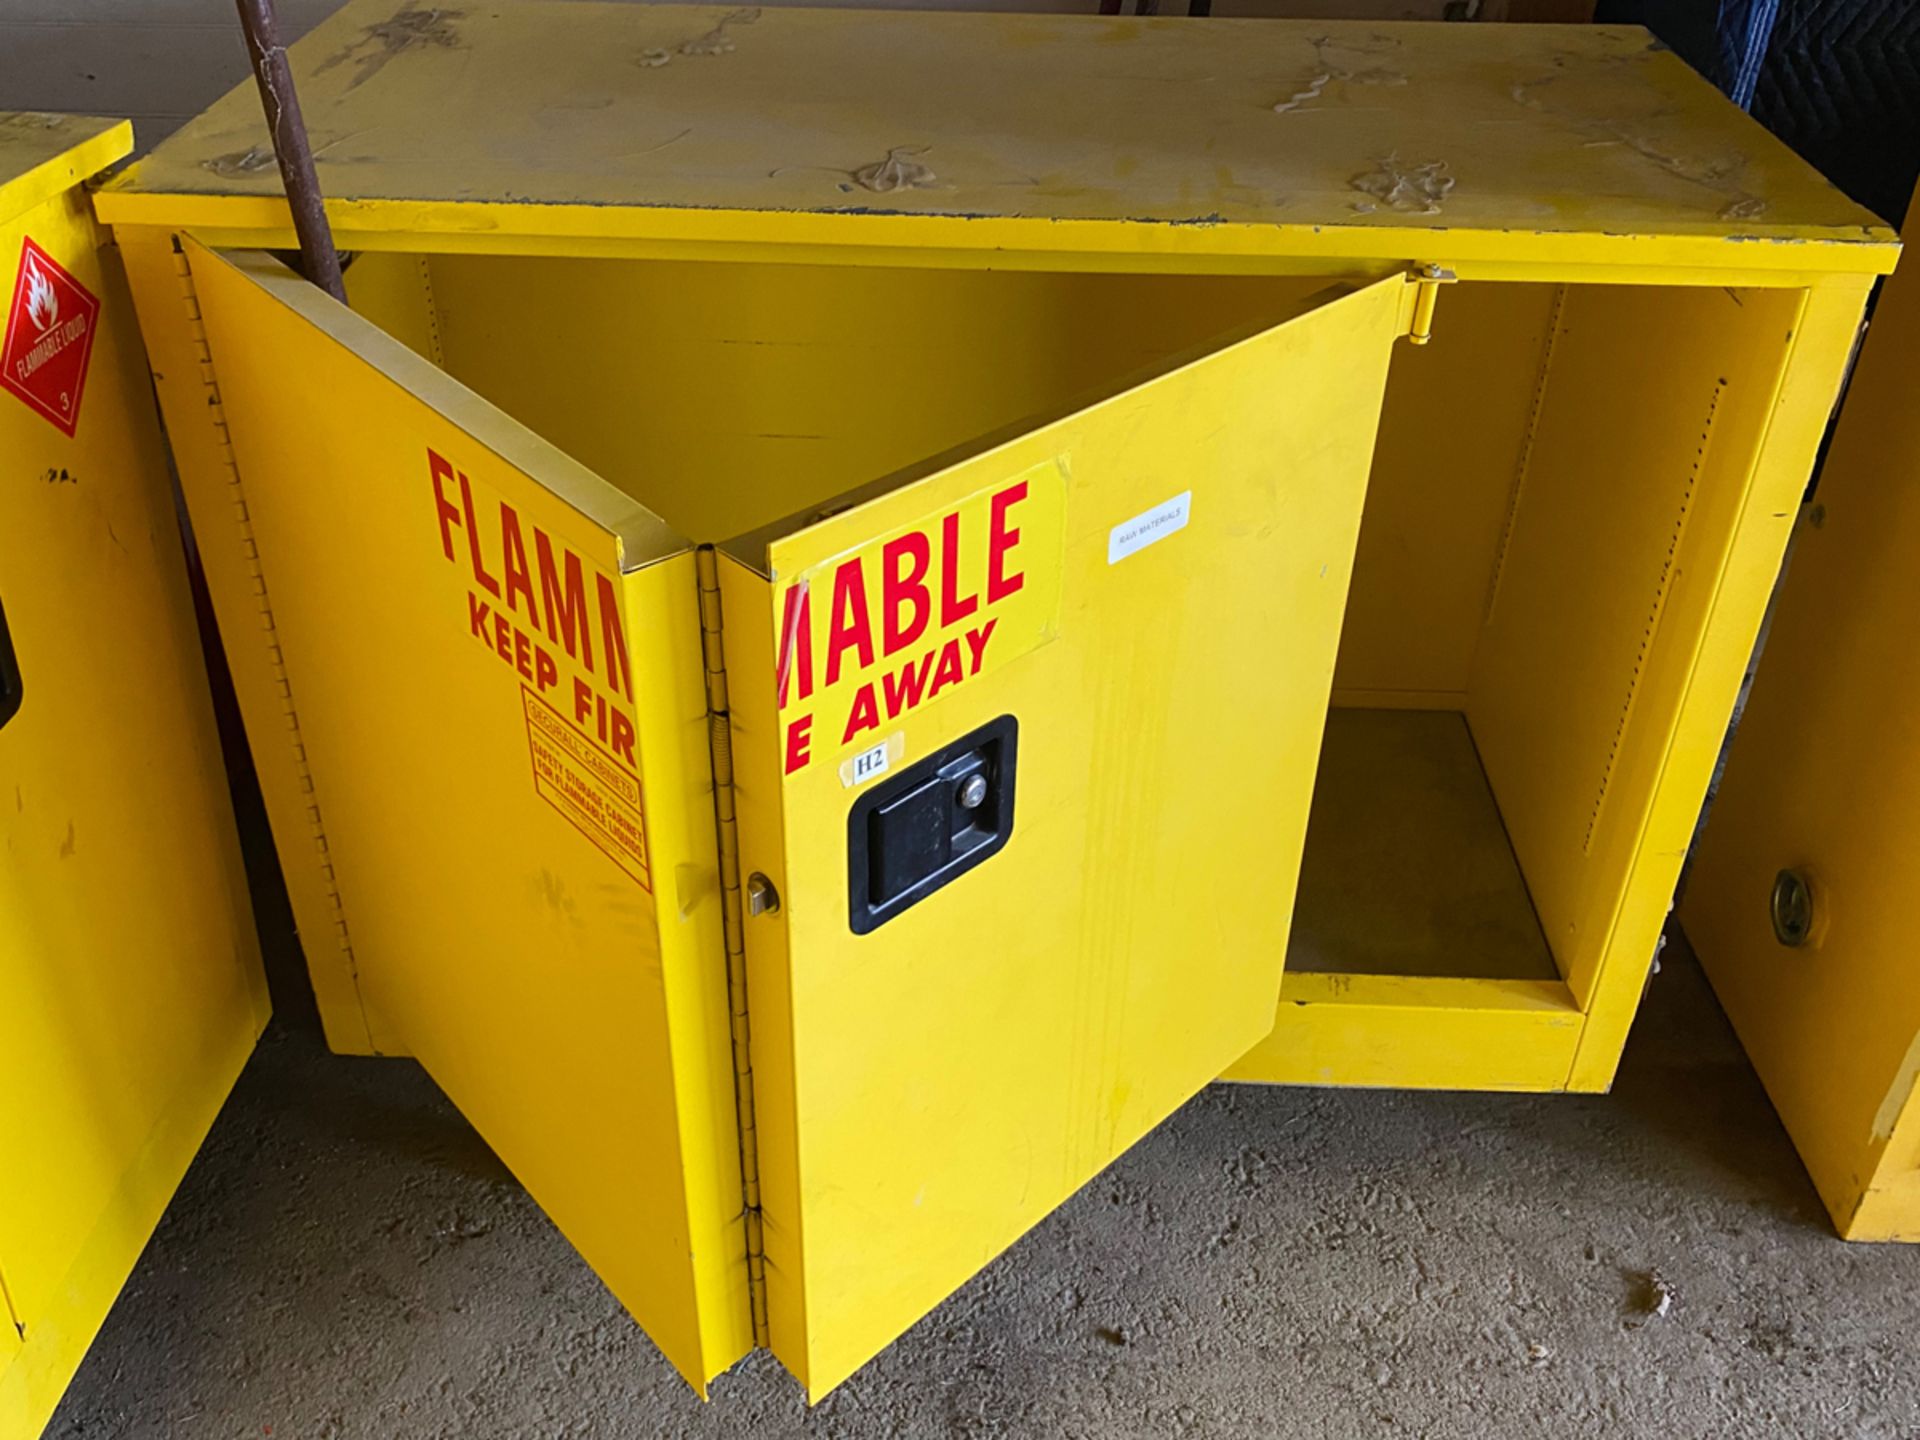 Flammable Liquid Safety Storage Cabinet - Image 2 of 4